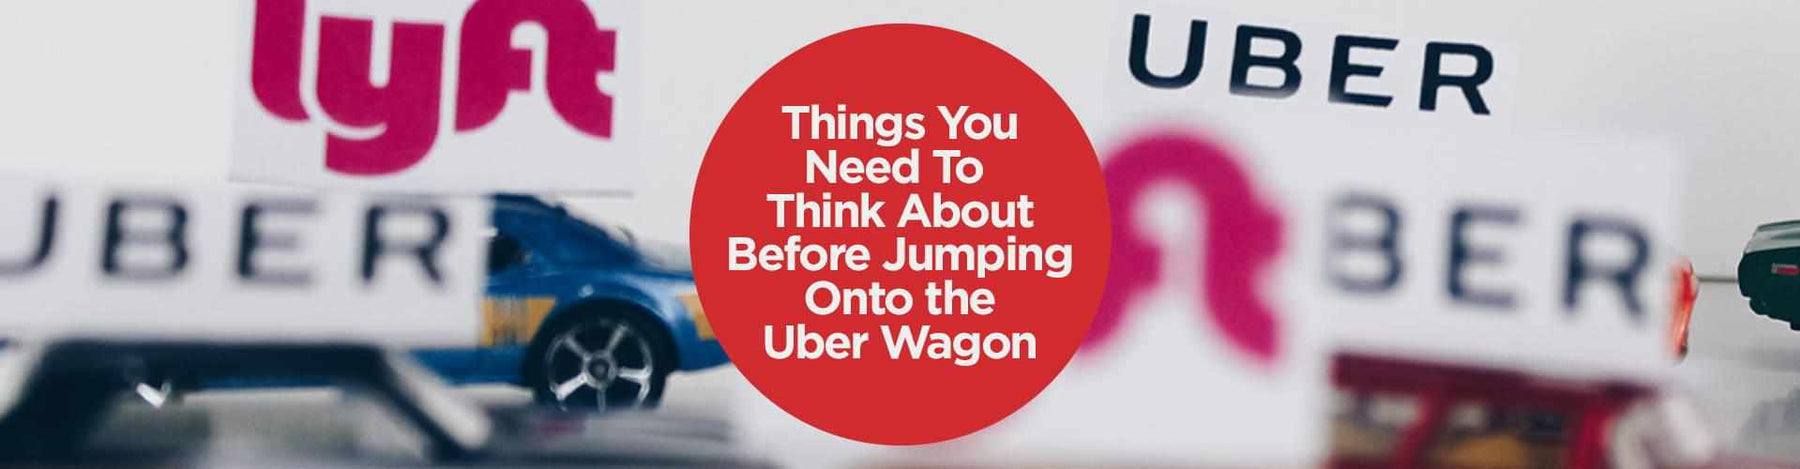 Things You Need To Think About Before Jumping Onto the Uber Wagon -  - BlackboxMyCar Canada